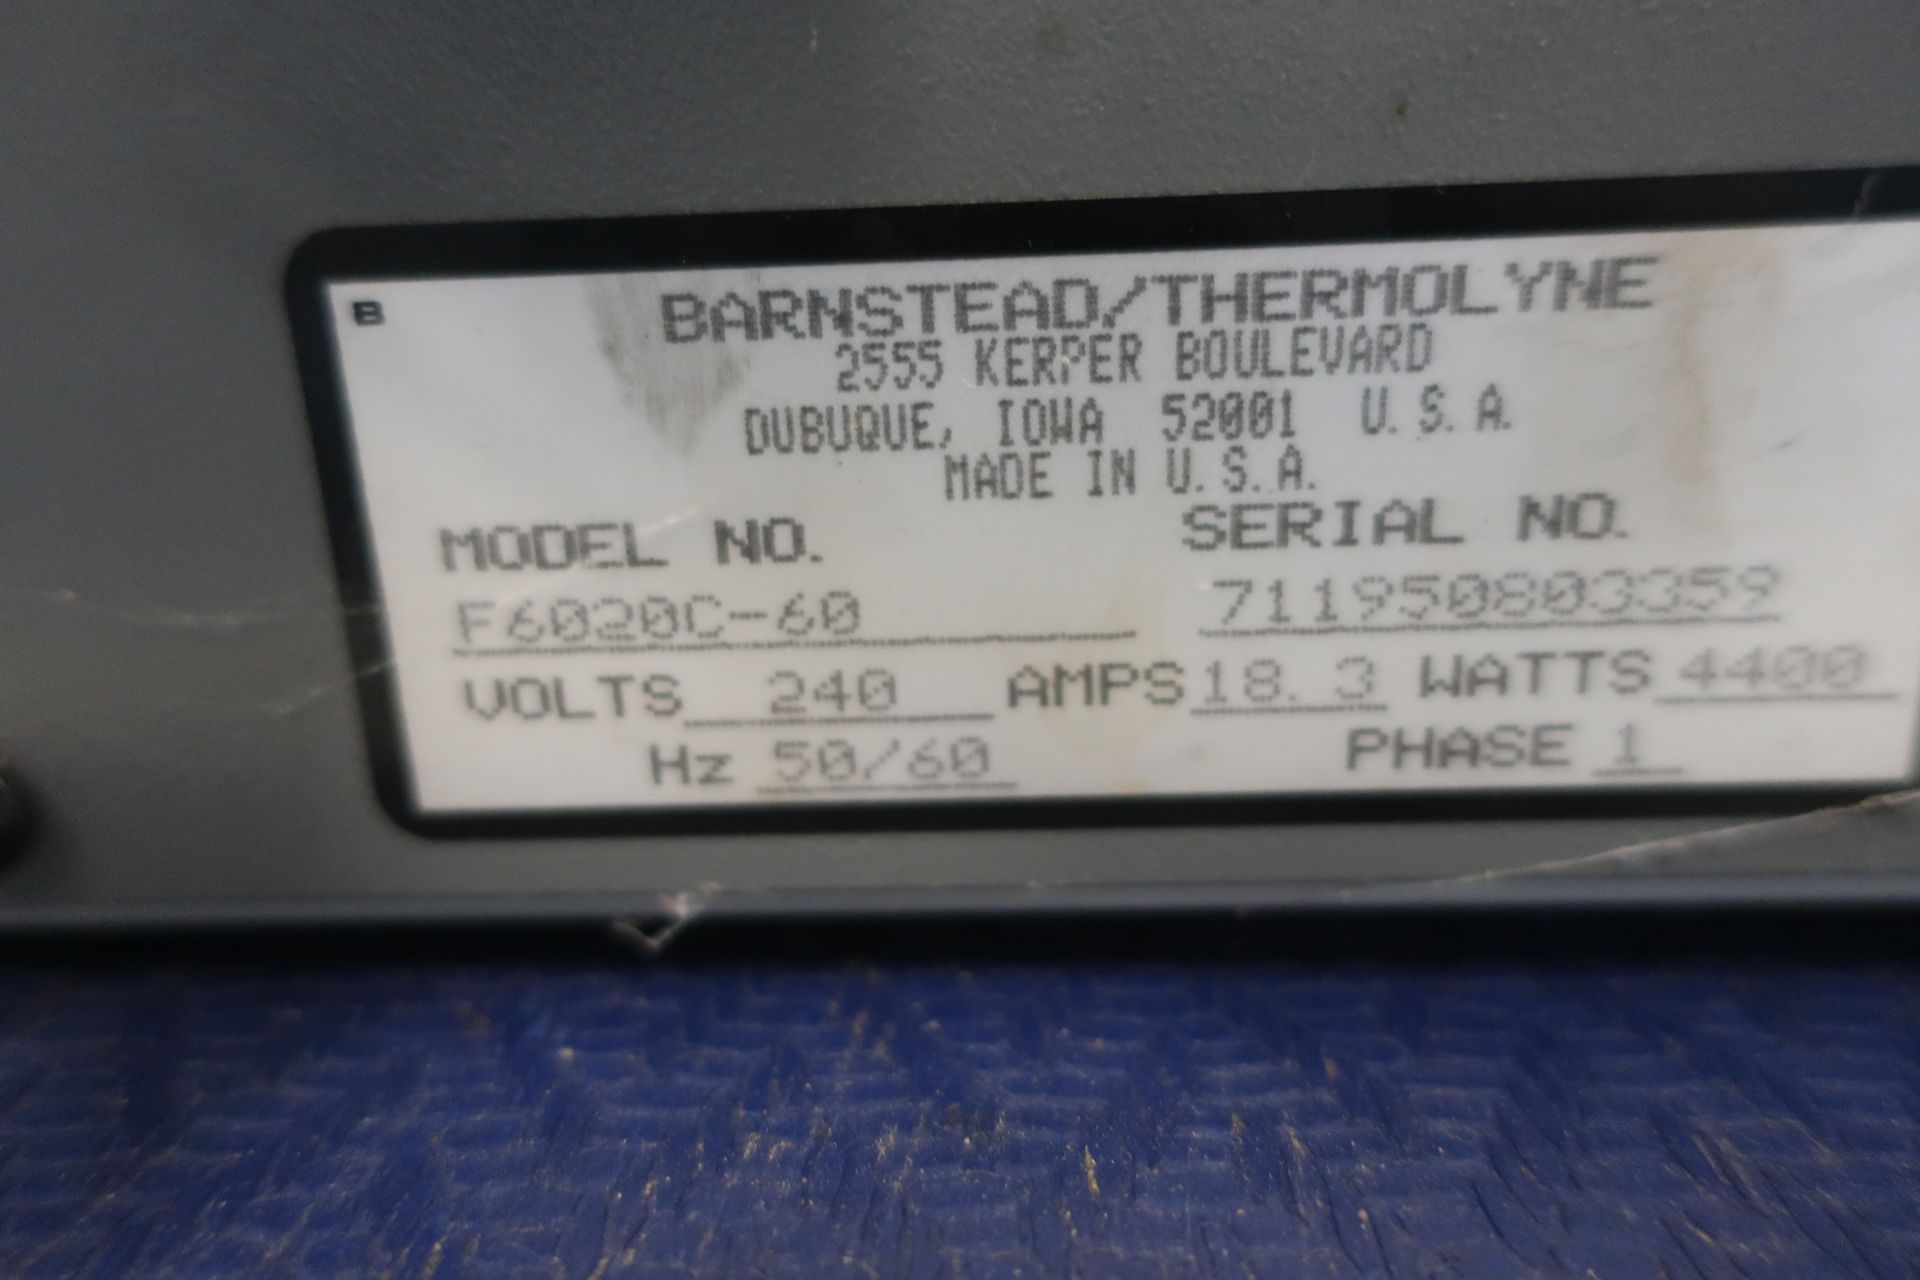 Thermolyne 6000 Furnace Model F6020C-60, SN 711950803359 - Image 4 of 5